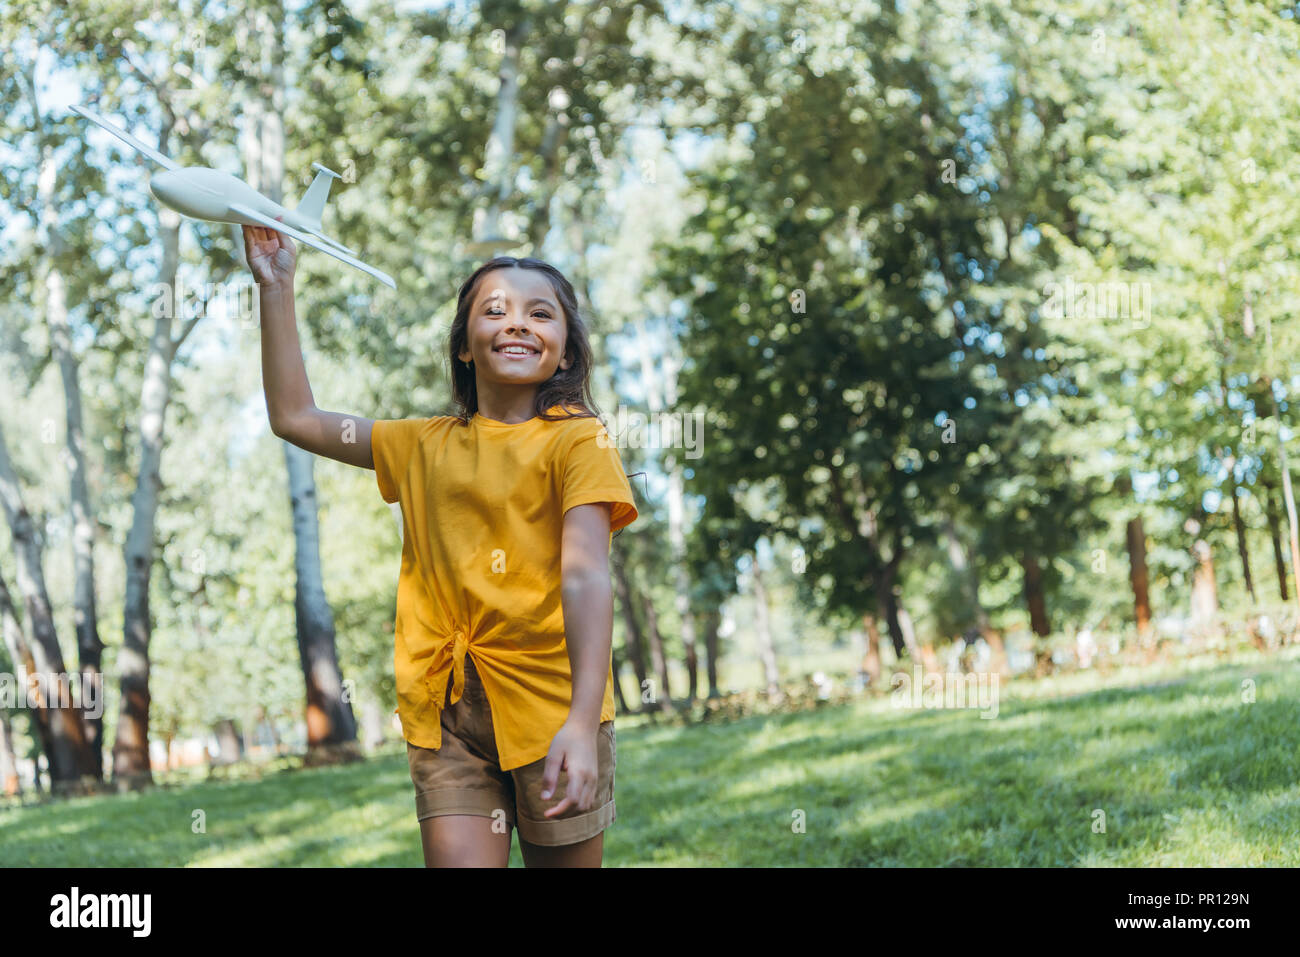 adorable happy child playing with toy plane in park Stock Photo